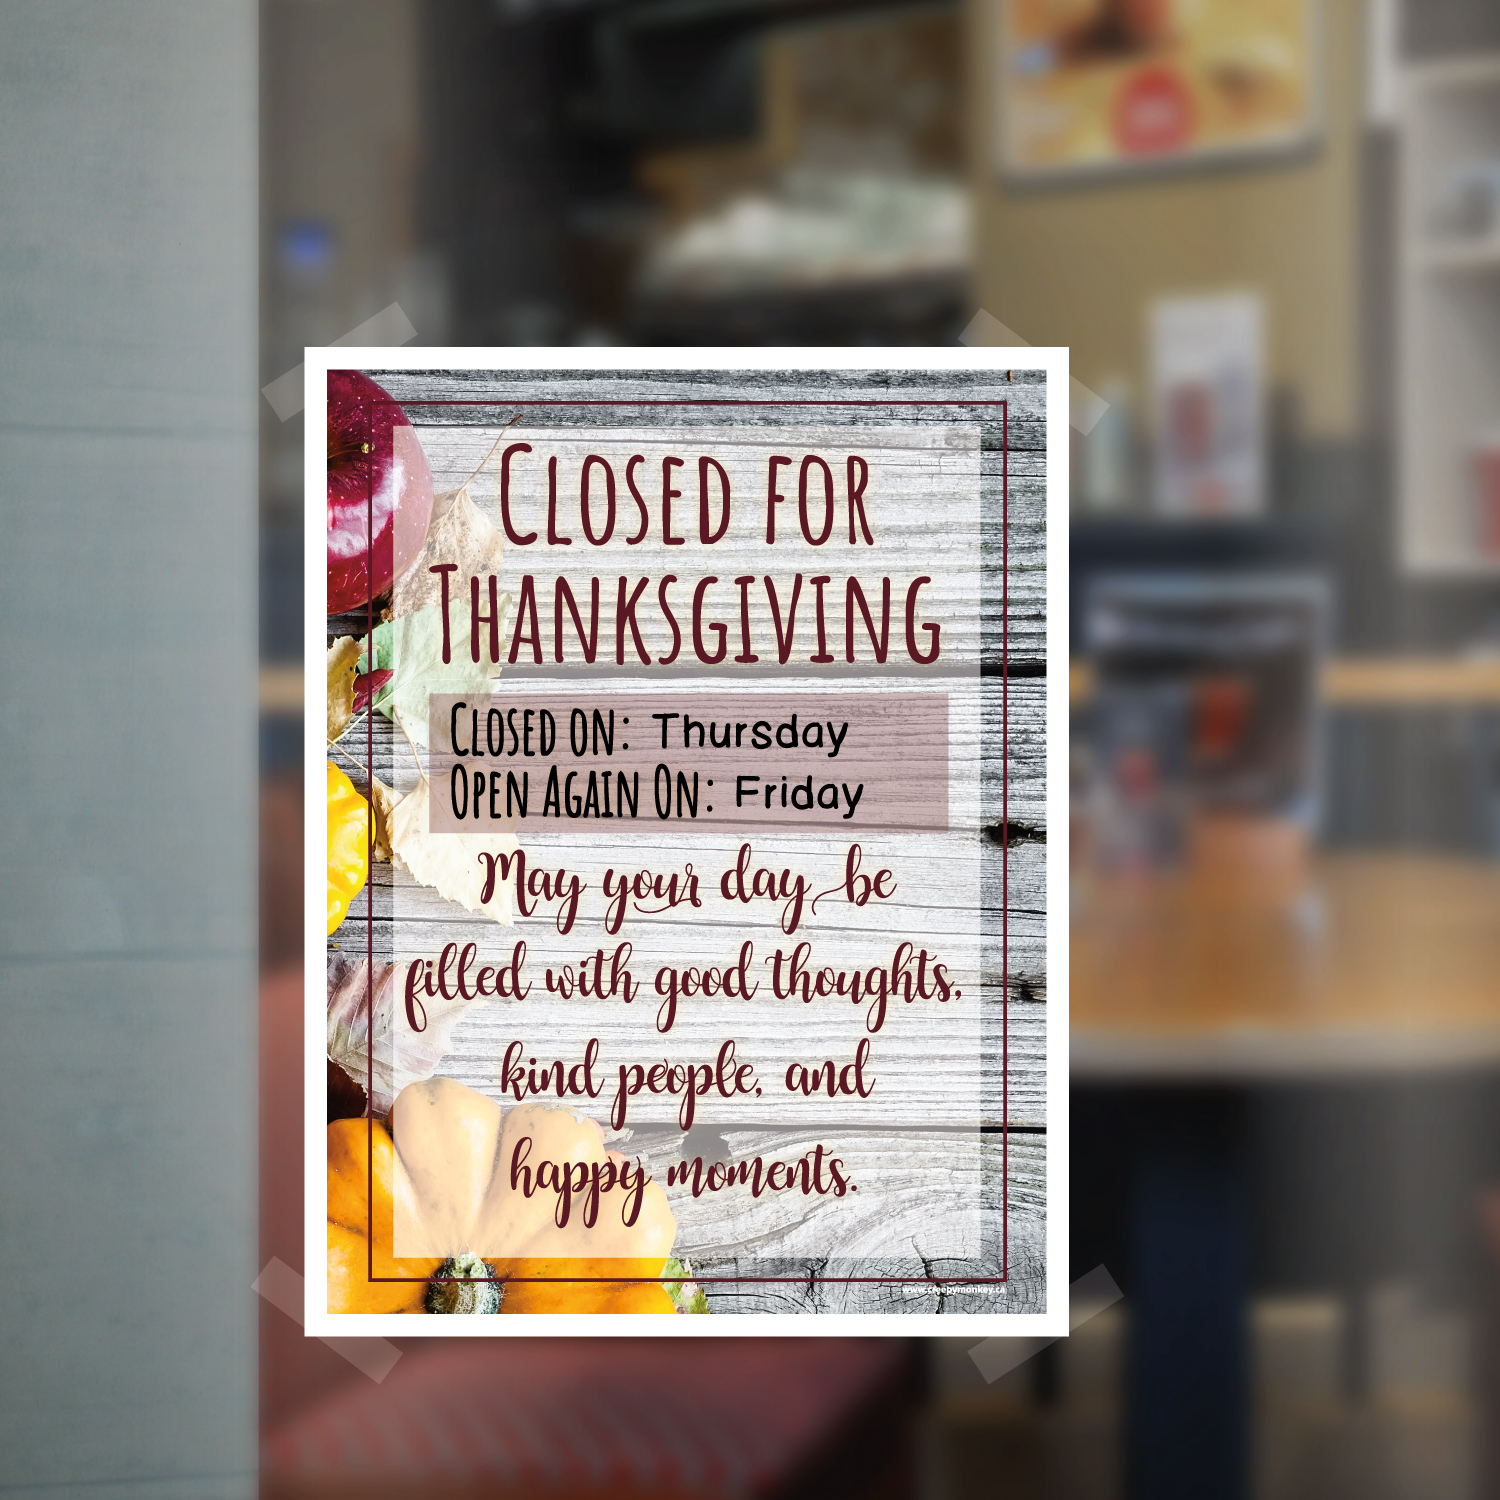 Closed-for-thanksgiving